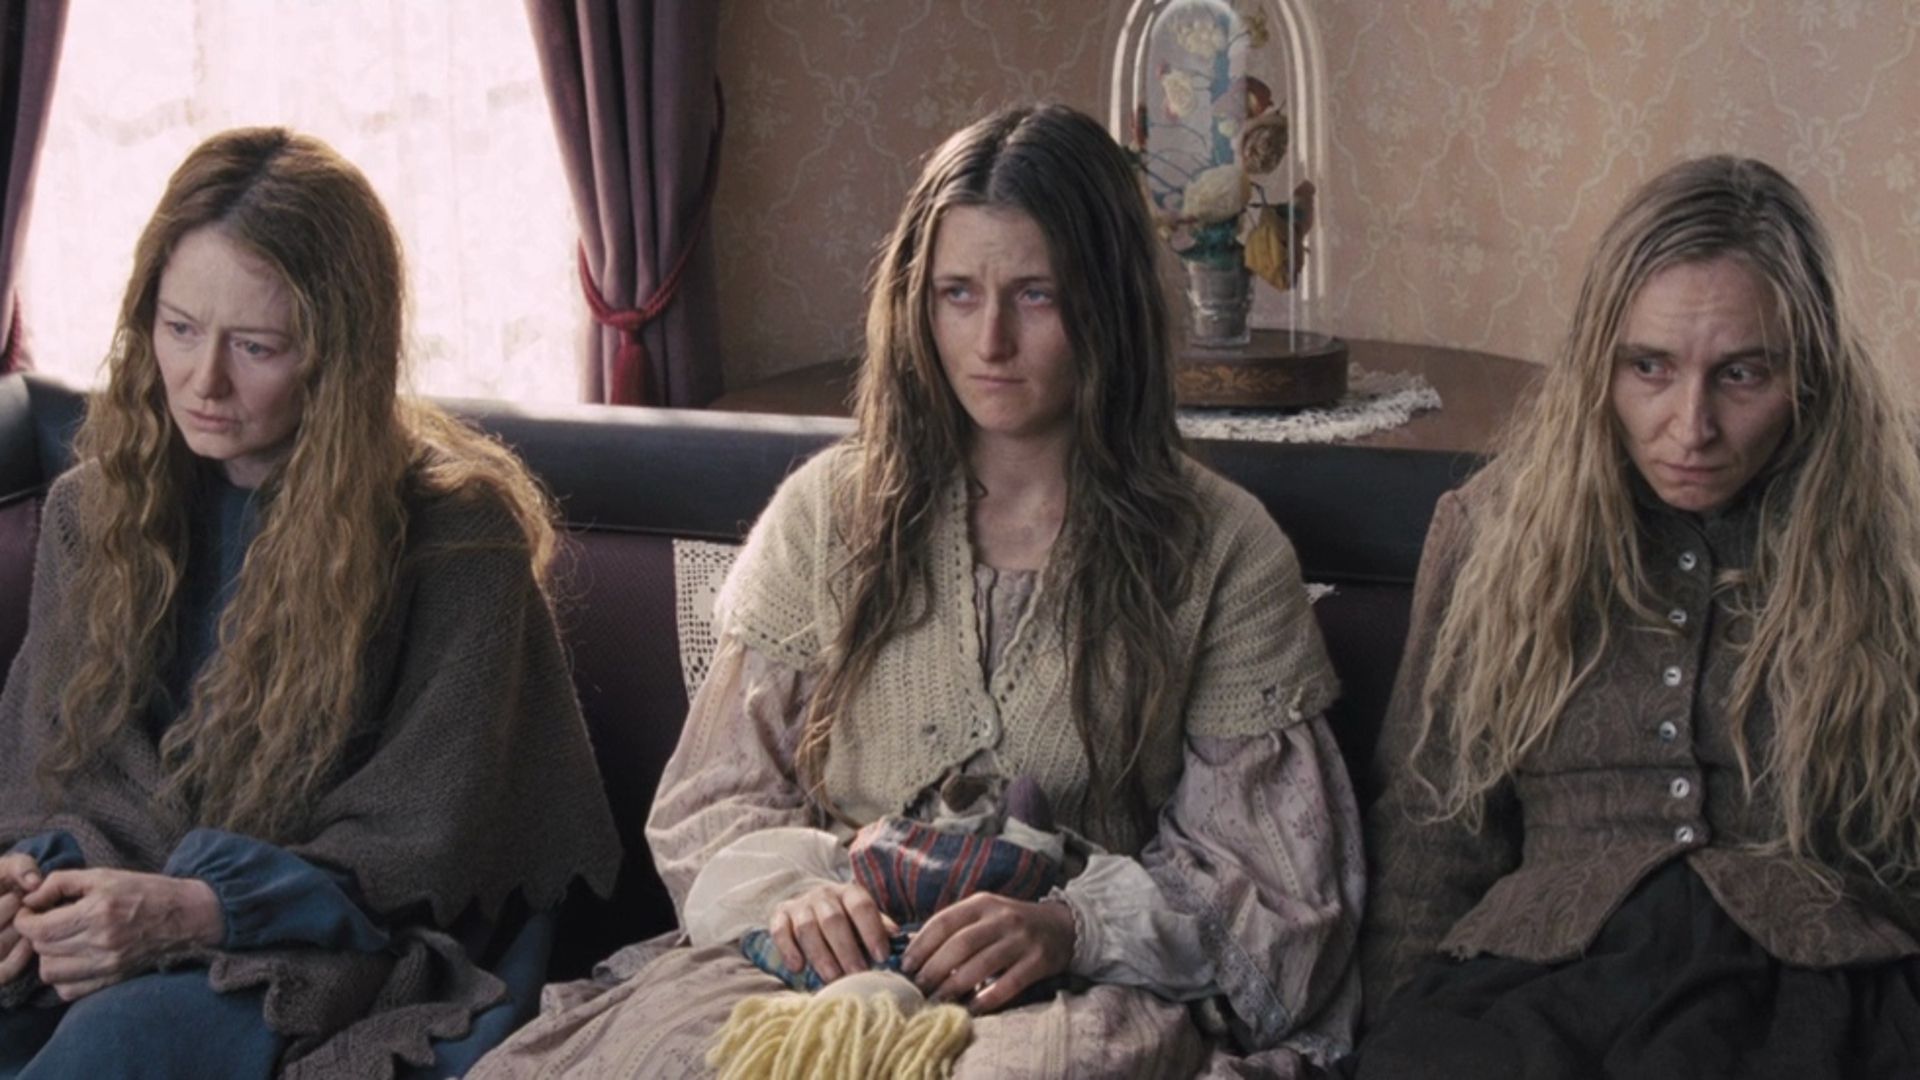 The immigrant women sit on a sofa in The Homesman